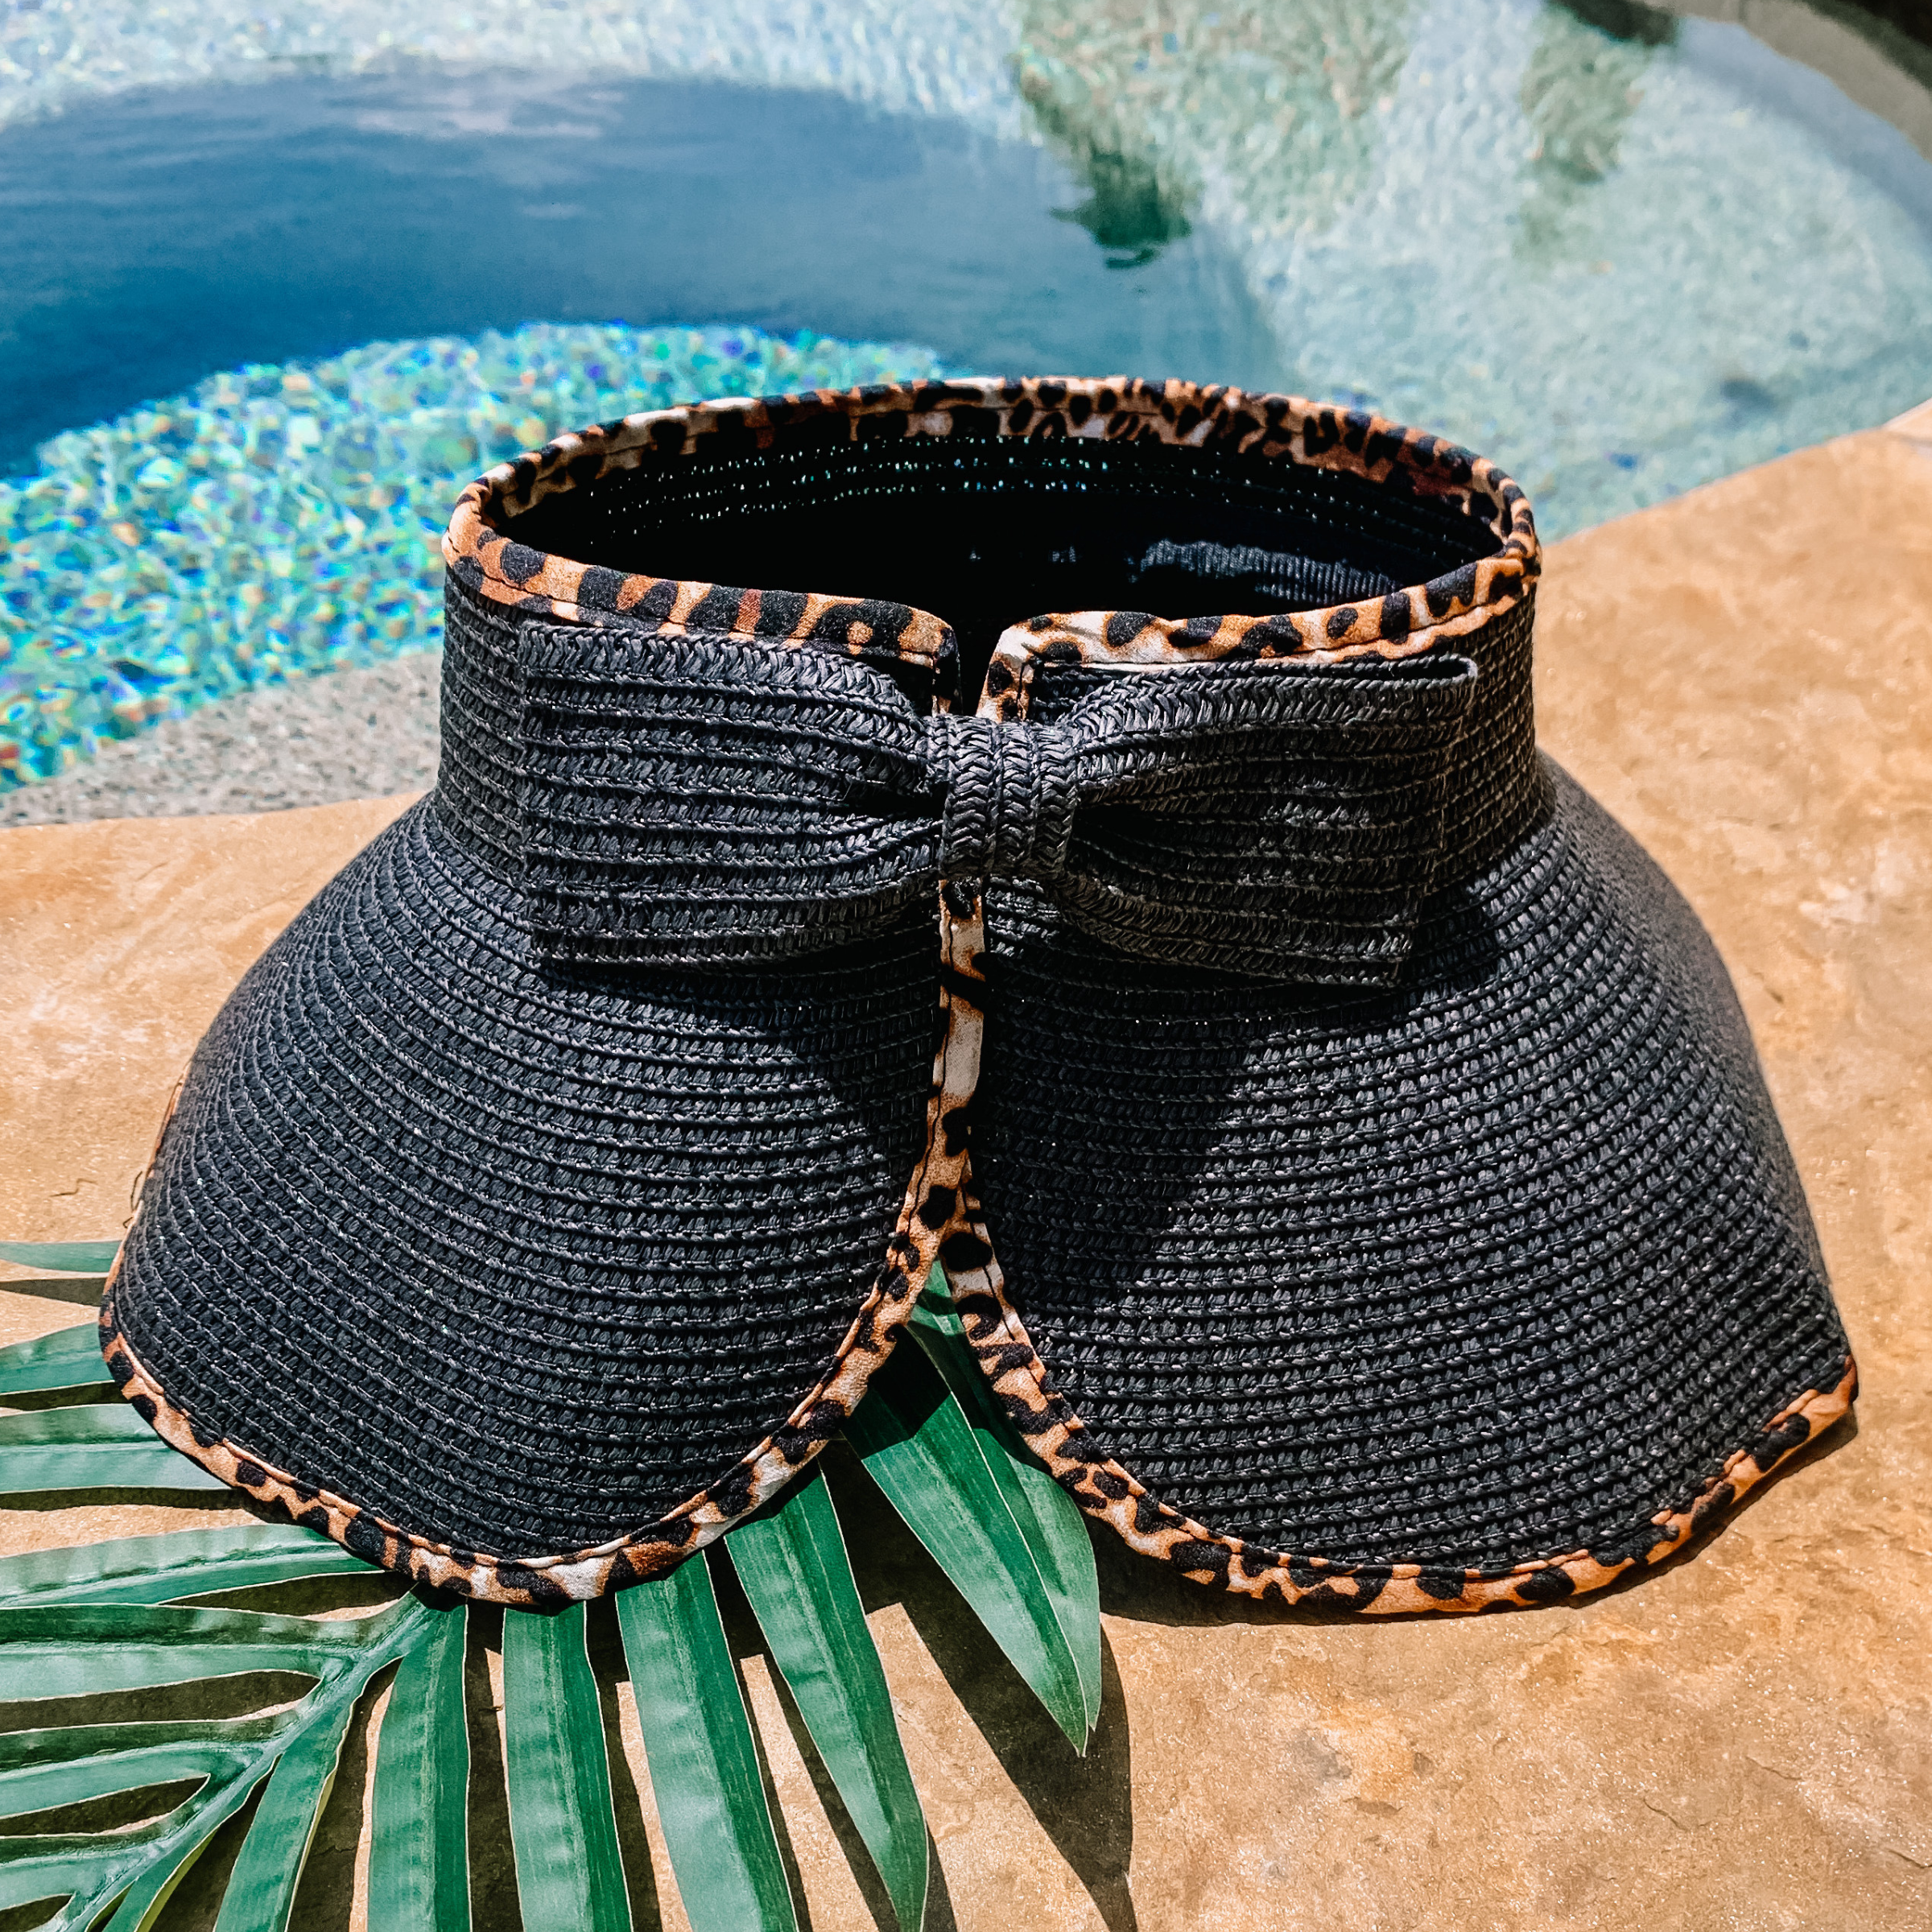 Poolside Chic Velcro Sun Visor in Black with Leopard Print Trim - Giddy Up Glamour Boutique